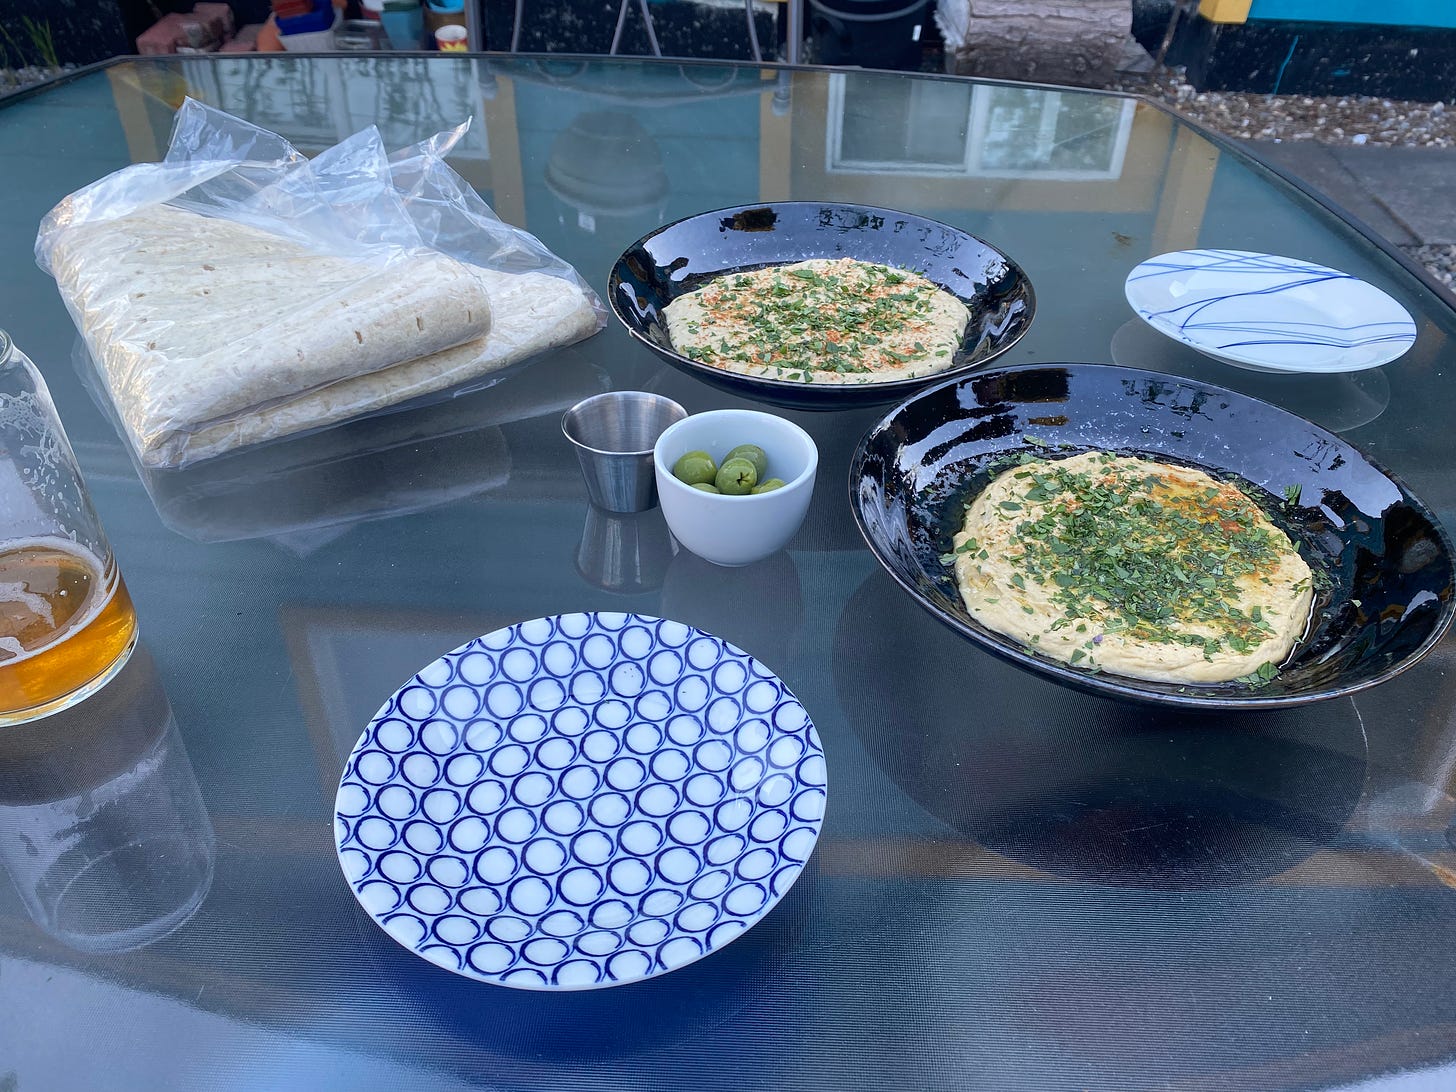 On an outdoor glass table, two shallow black bowls with hummus and baba ganouj, dusted with smoked paprika and lots of herbs. They are flanked by two small side plates, and next to them is a small dish of green olives and a package of taftoon.